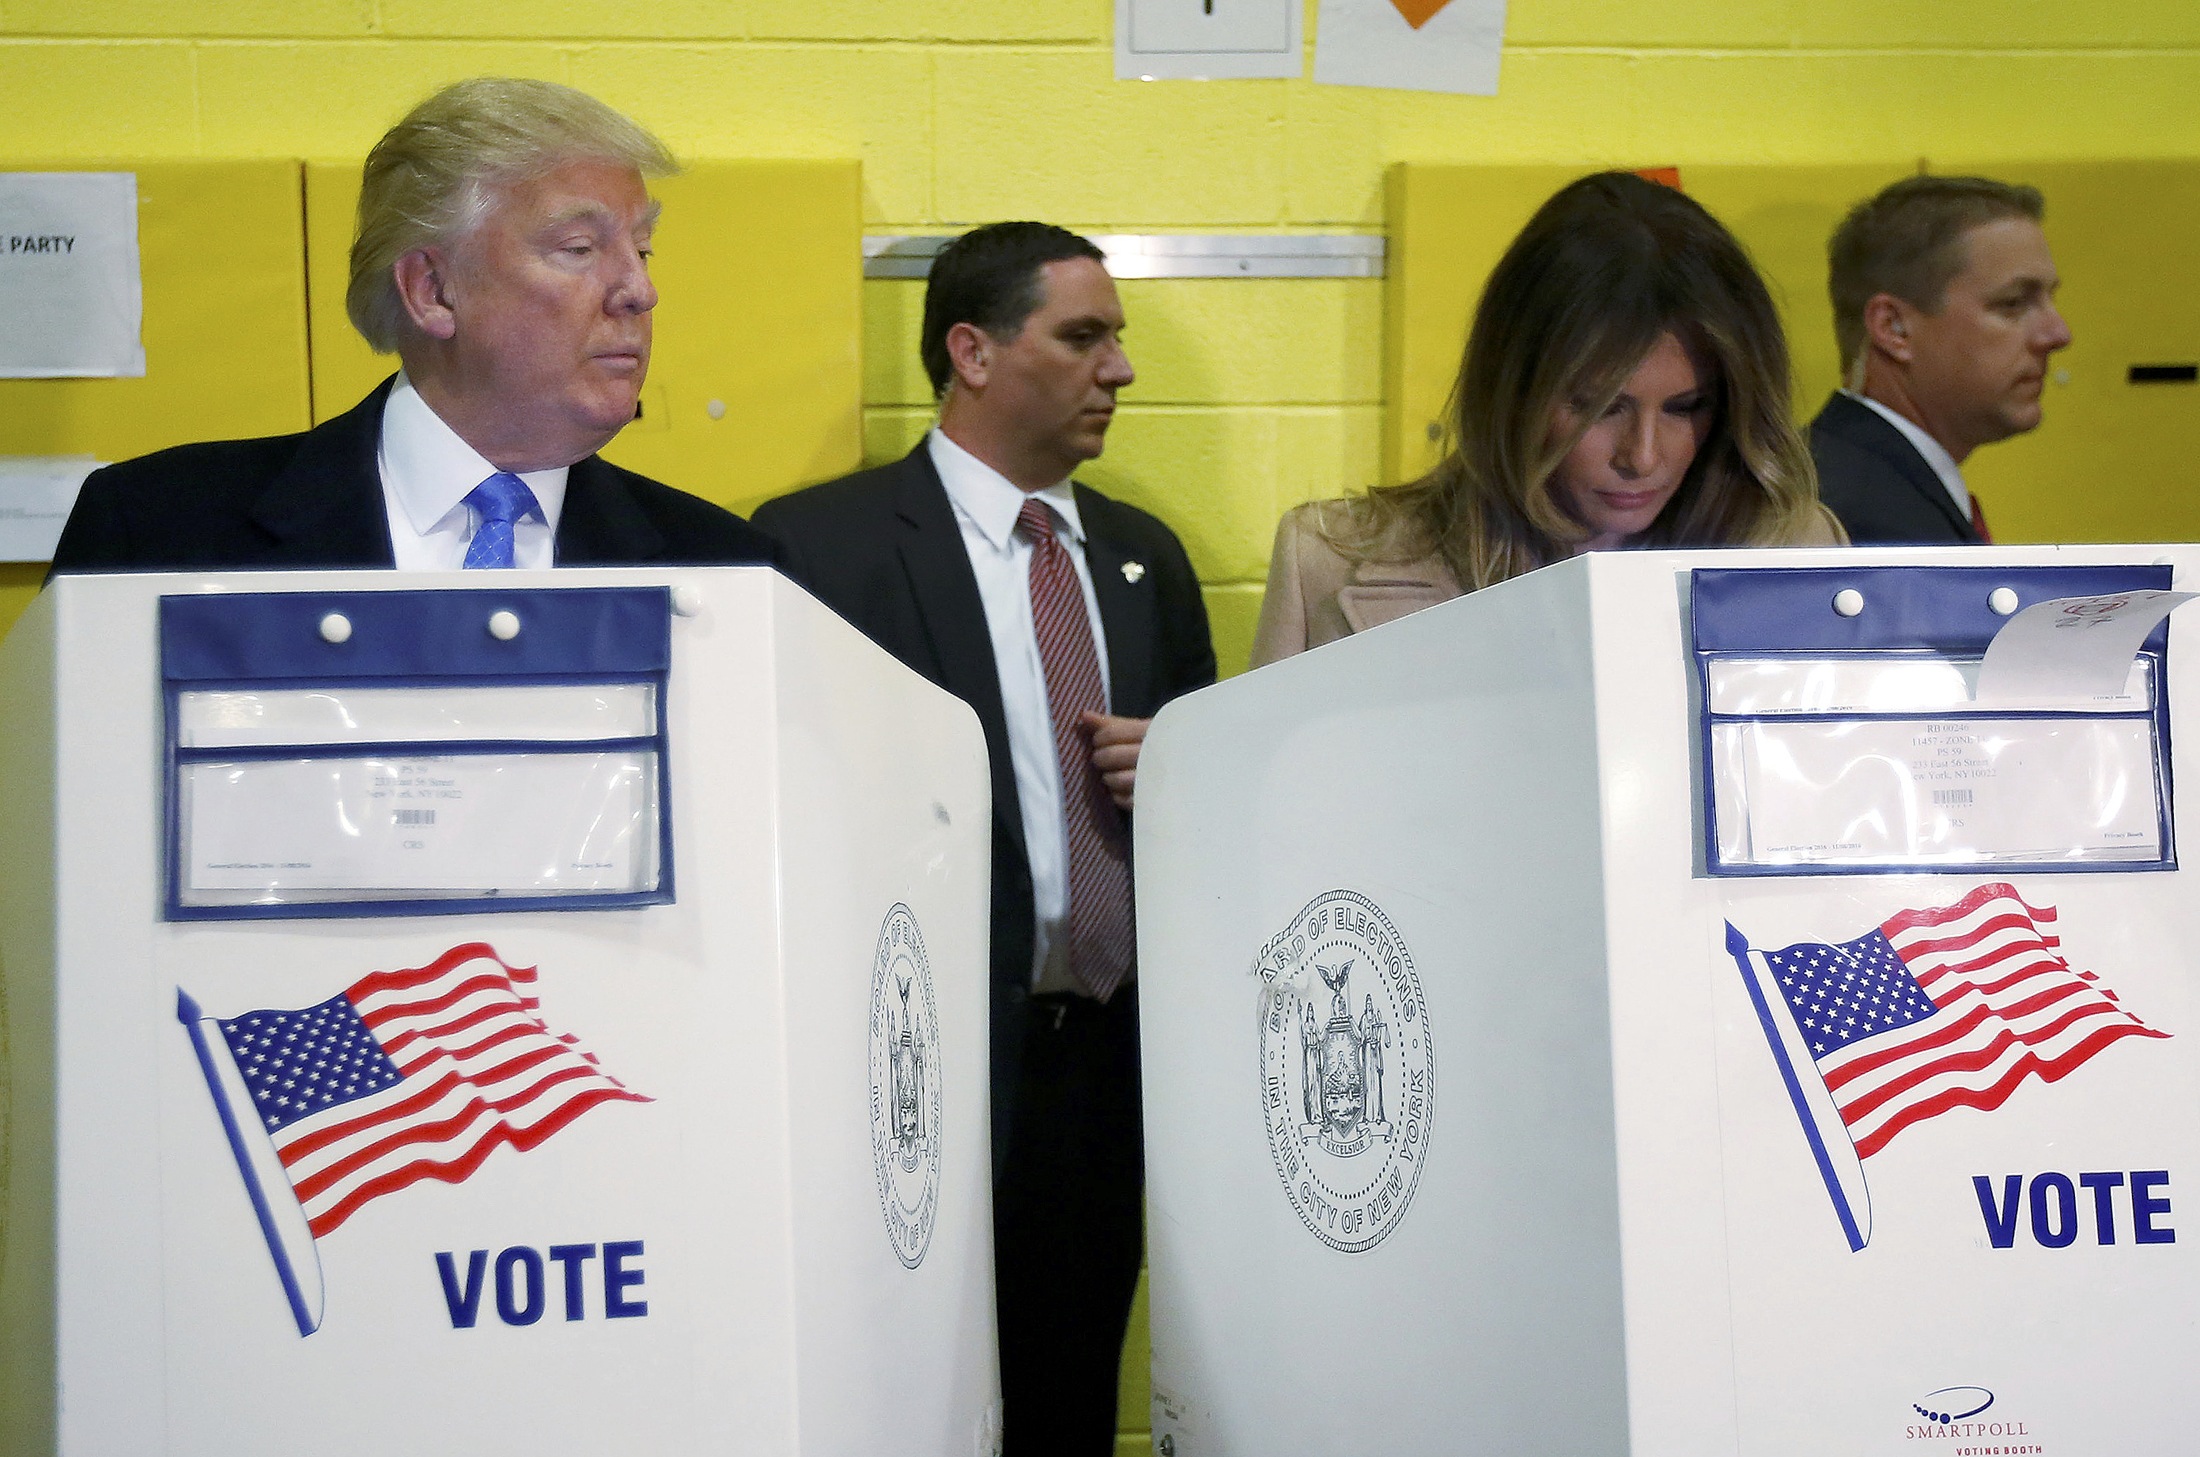 Republican presidential nominee Donald Trump and his wife Melania Trump vote at PS 59 in New York, New York, U.S. November 8, 2016. REUTERS/Carlo Allegrin